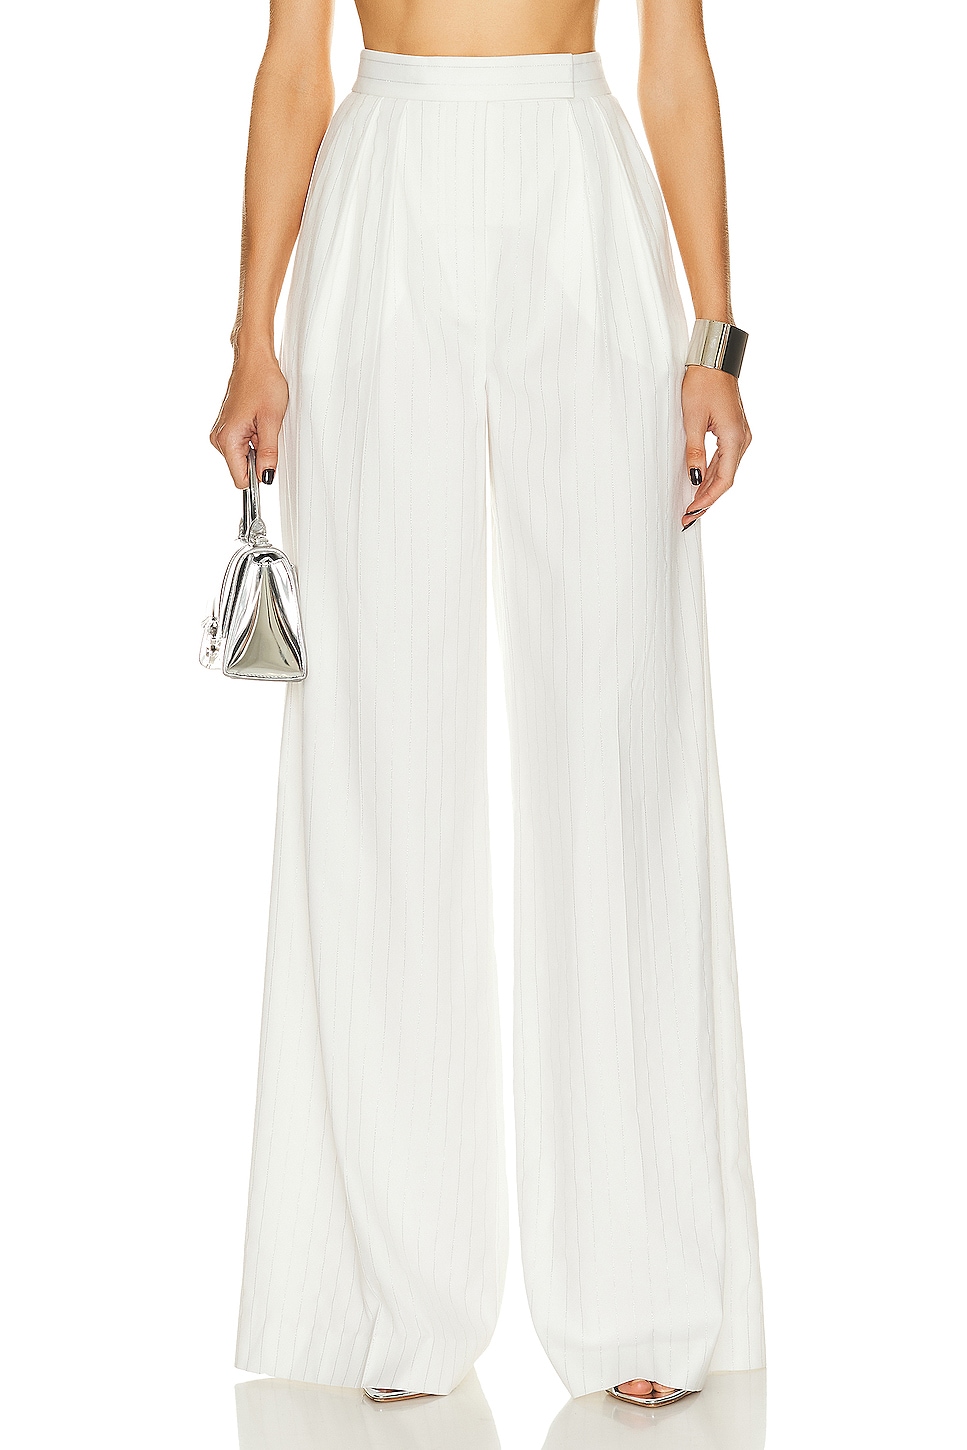 Image 1 of Alex Perry Pinstripe Pleat Wide Leg Trouser in White